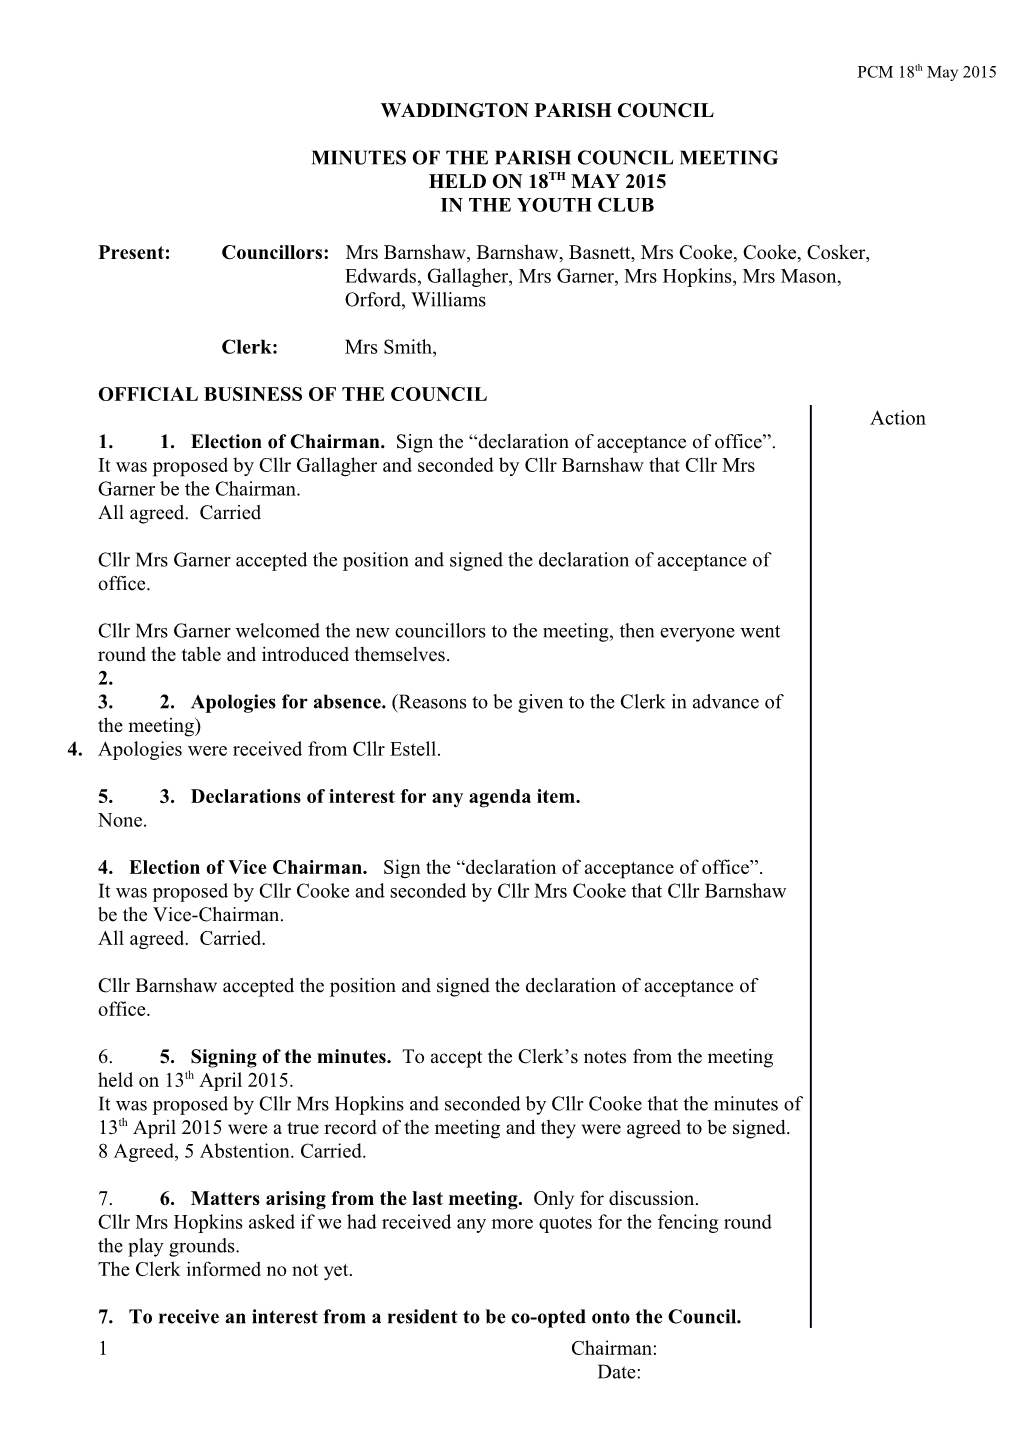 Minutes of the Parish Council Meeting s5